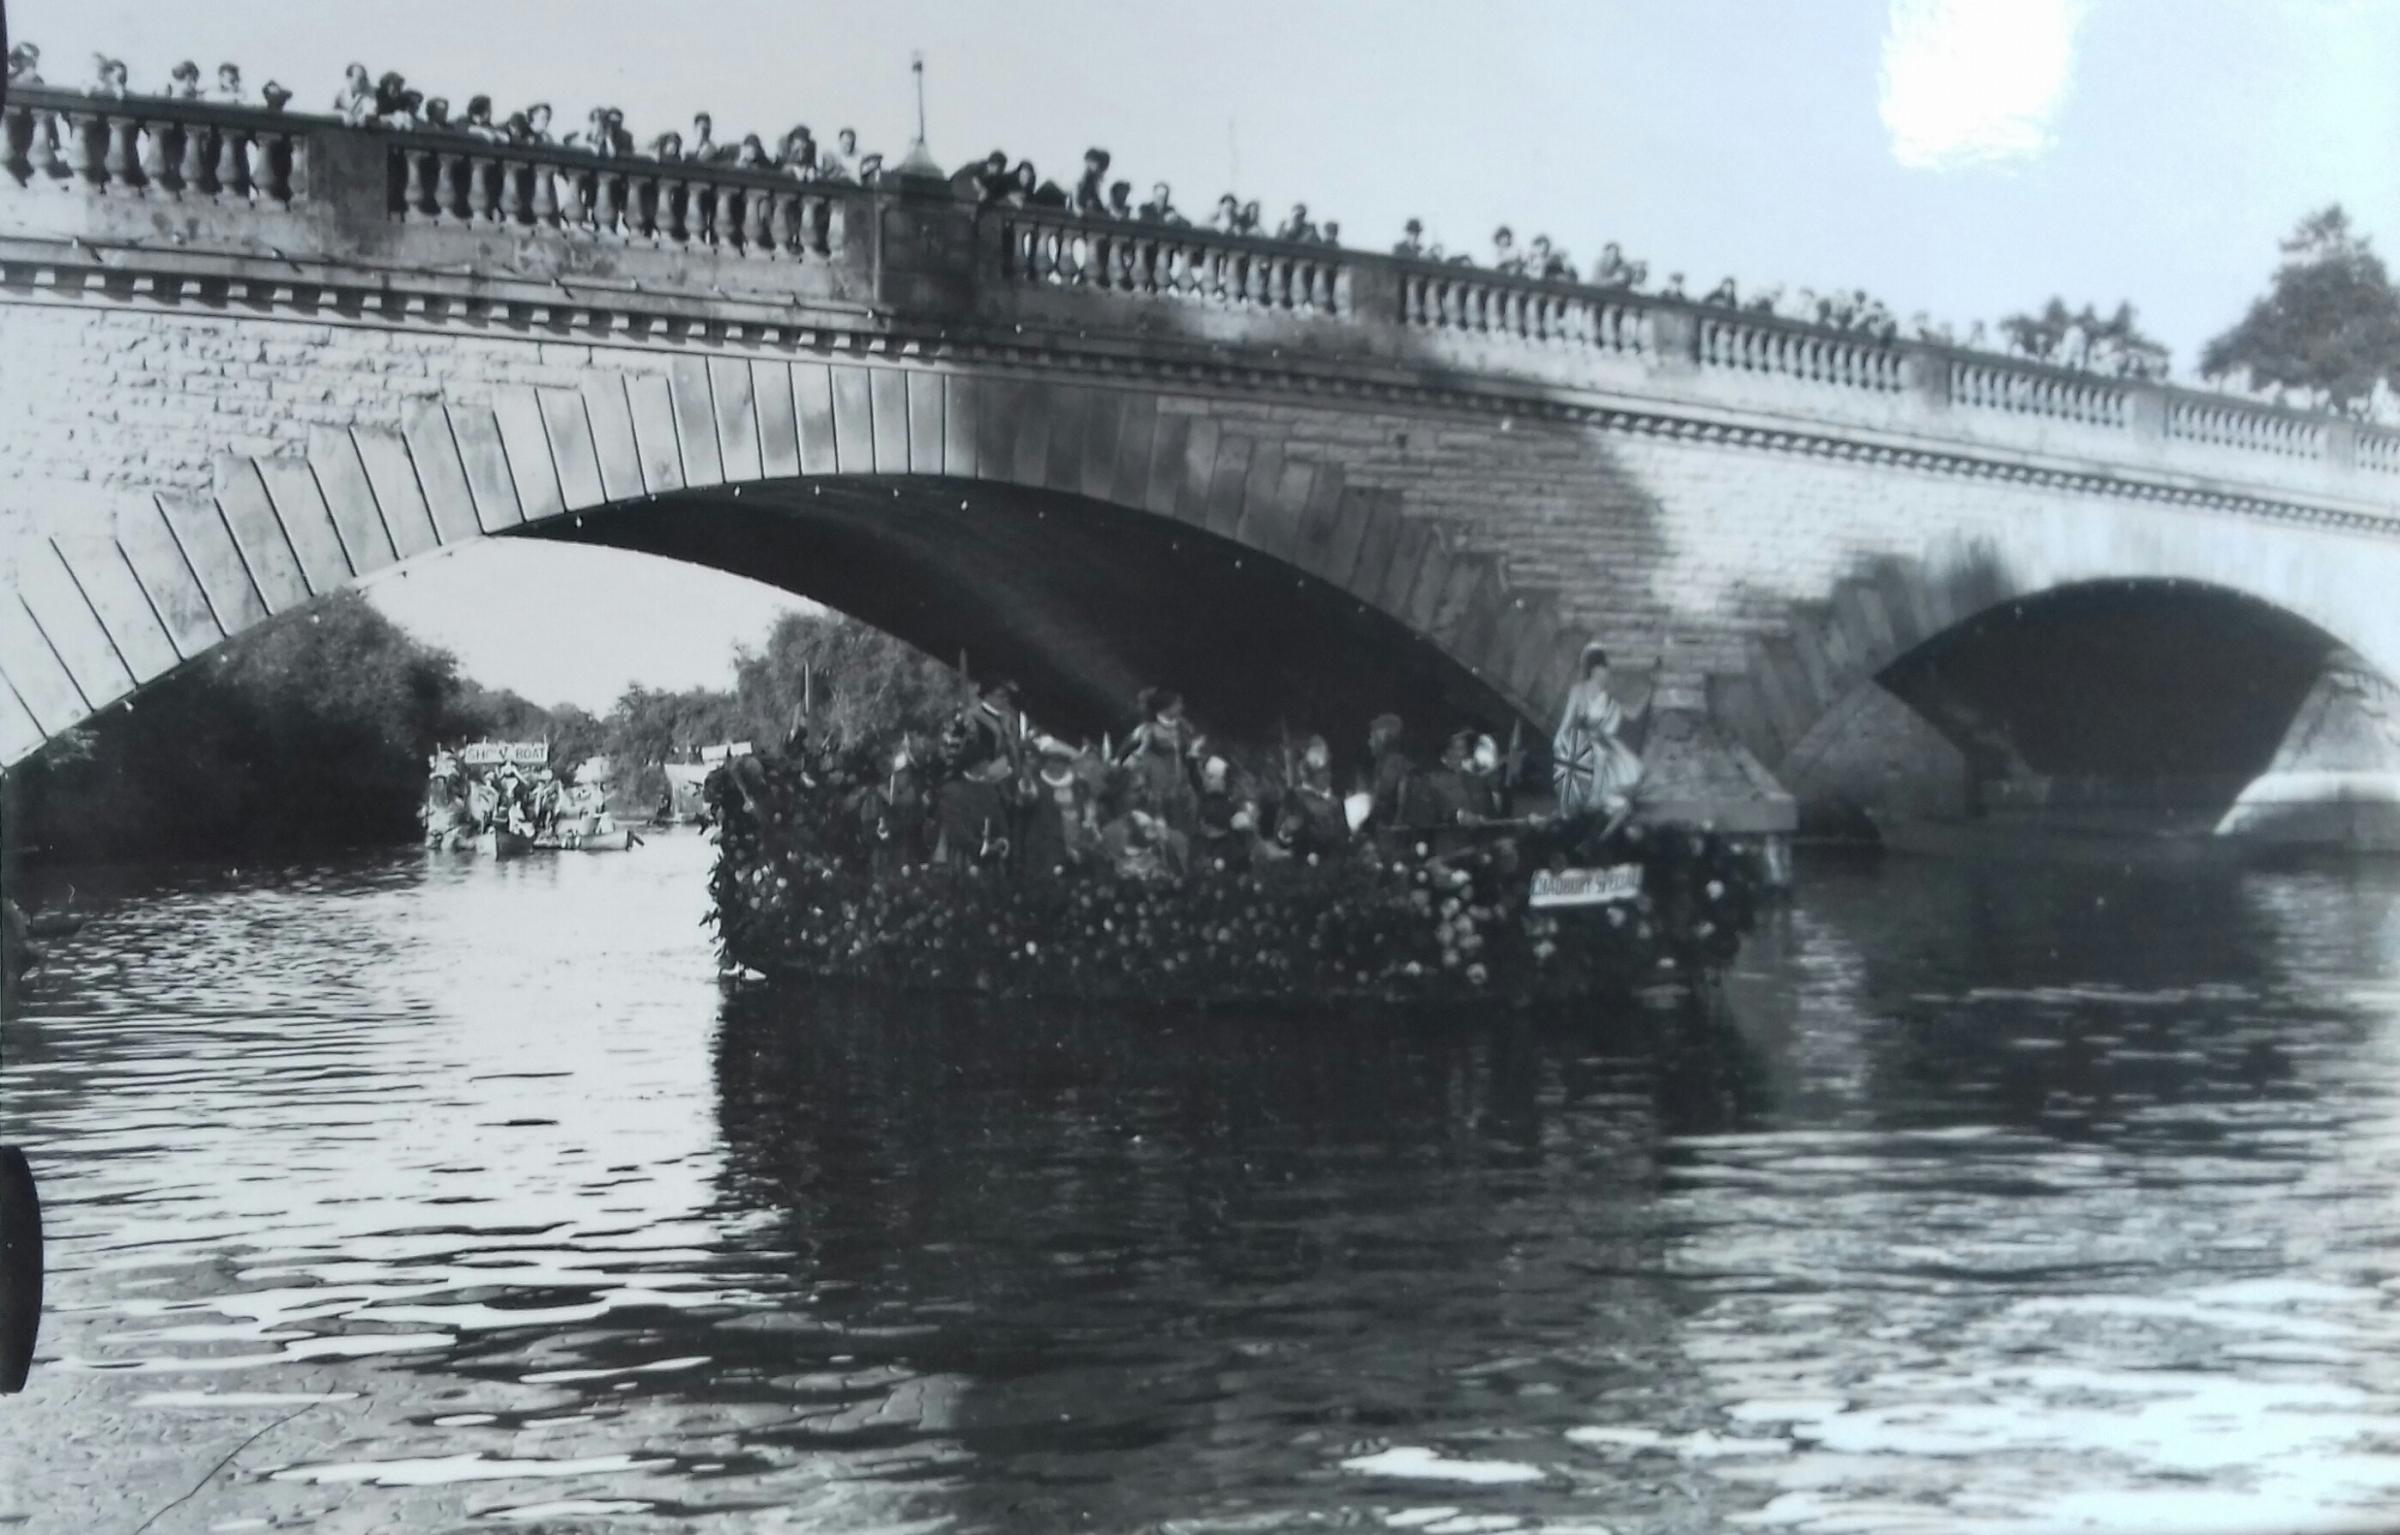 The 1946 procession was by no means the only one to be held on the Severn. Here is one with Britannia leading the way